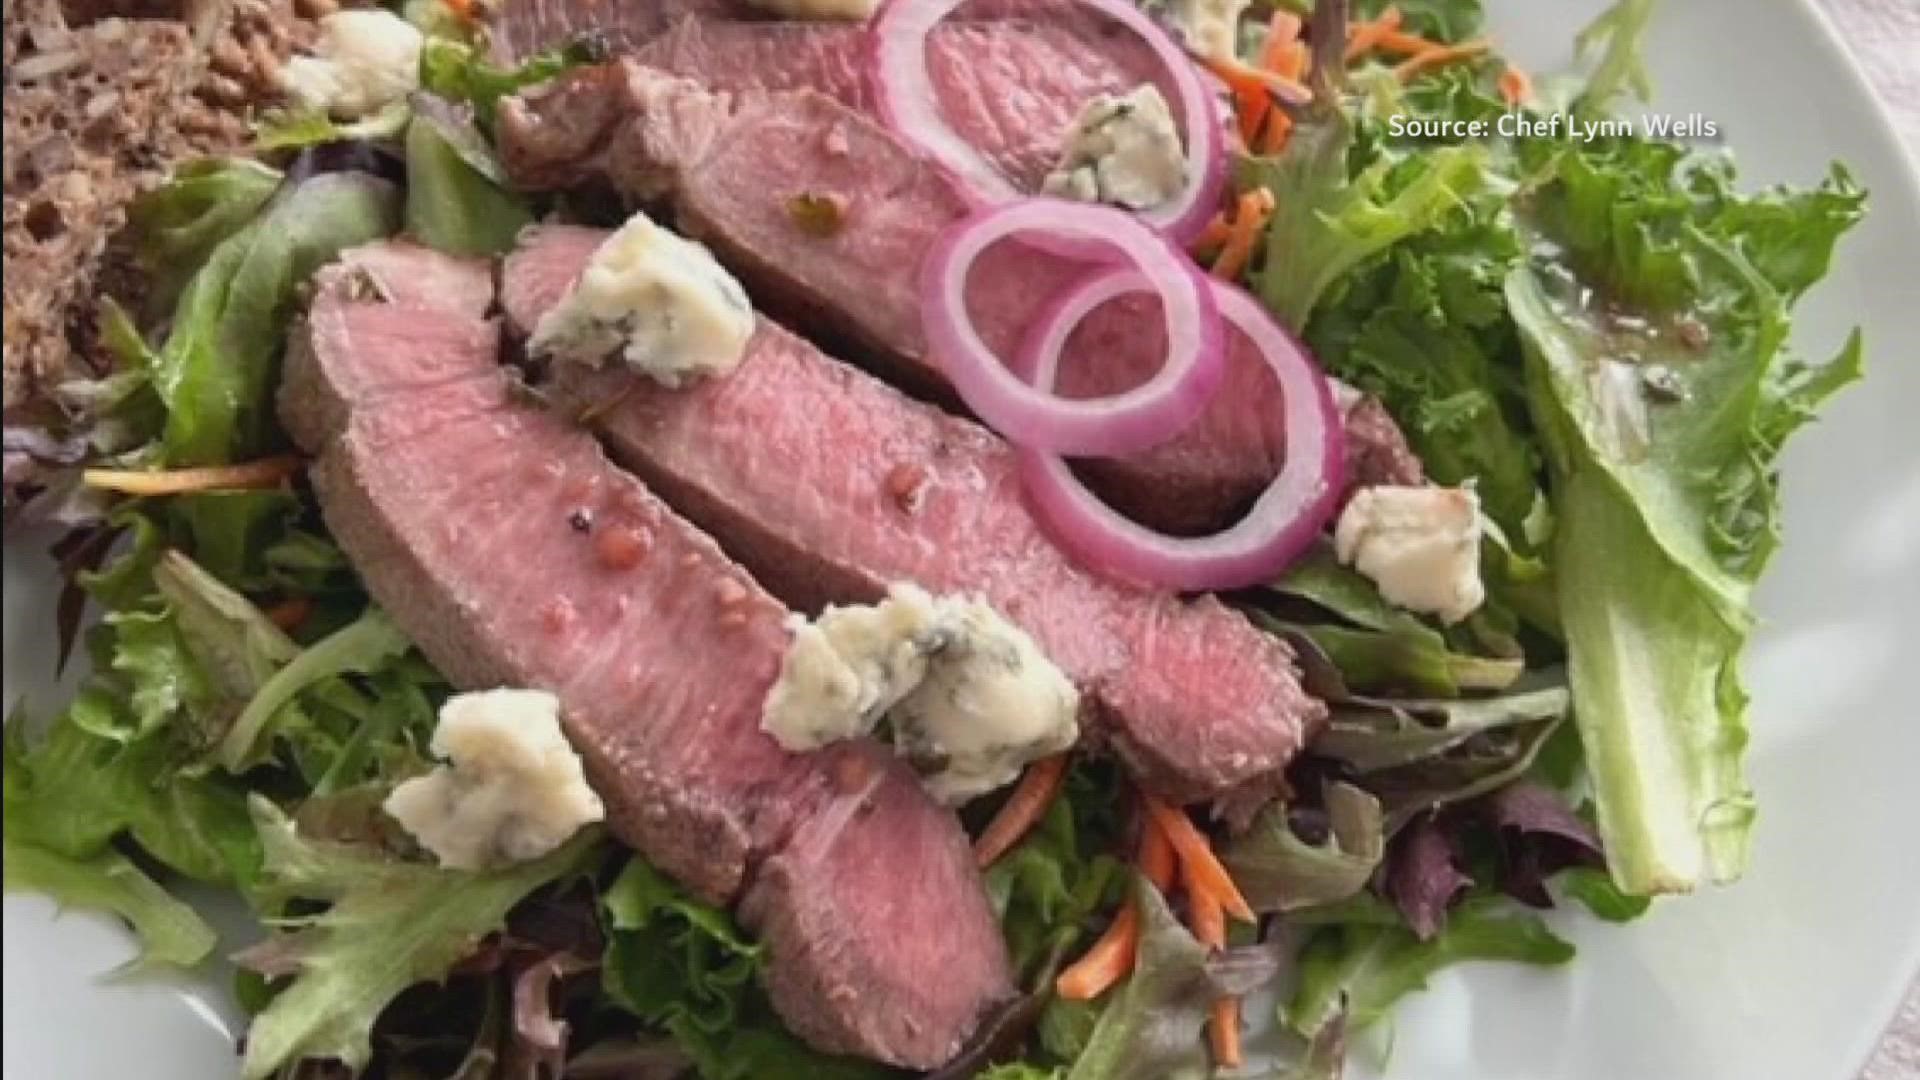 Check out these four summer salad recipes in the August issue of Our State Magazine: Summer garden salad, Corn & Tomato Salad, Steak & Blue Cheese Salad, Pea & Pasta